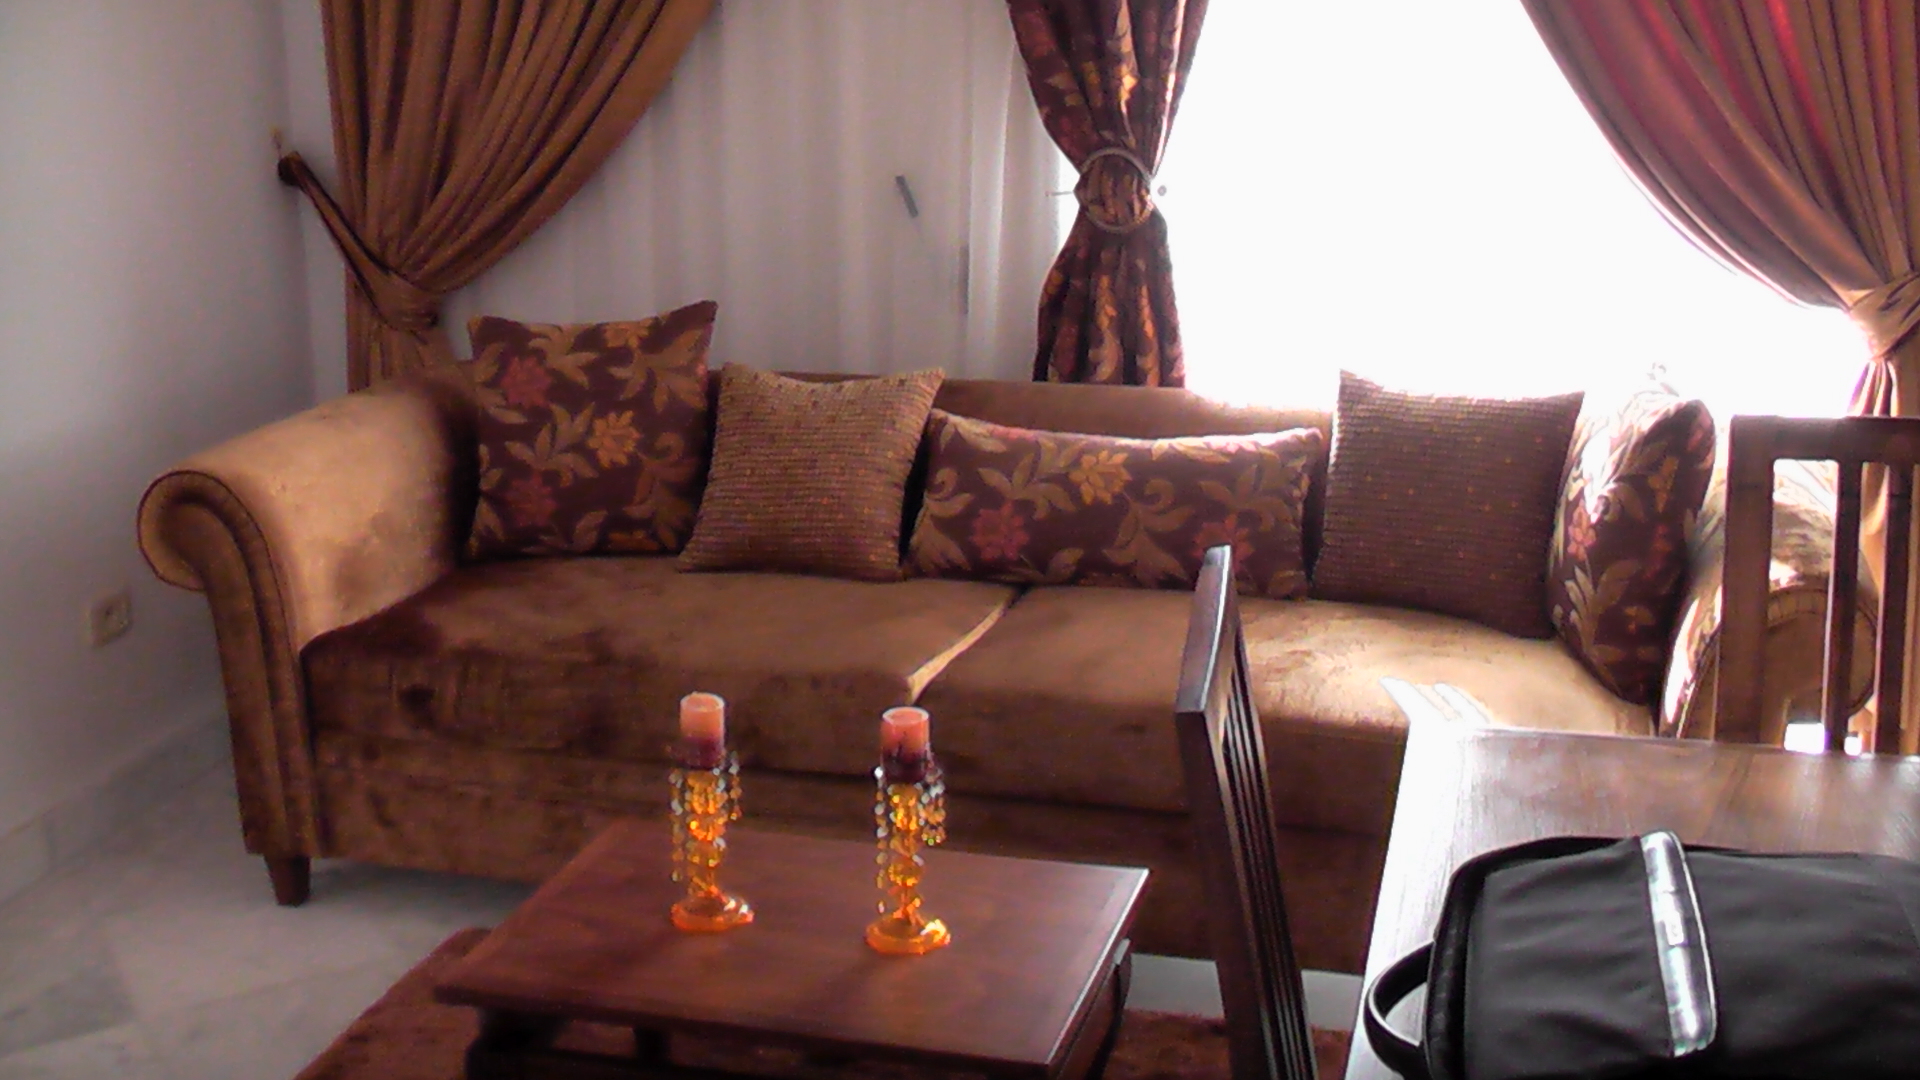 images_immo/tunis_immobilier120502chams1.JPG